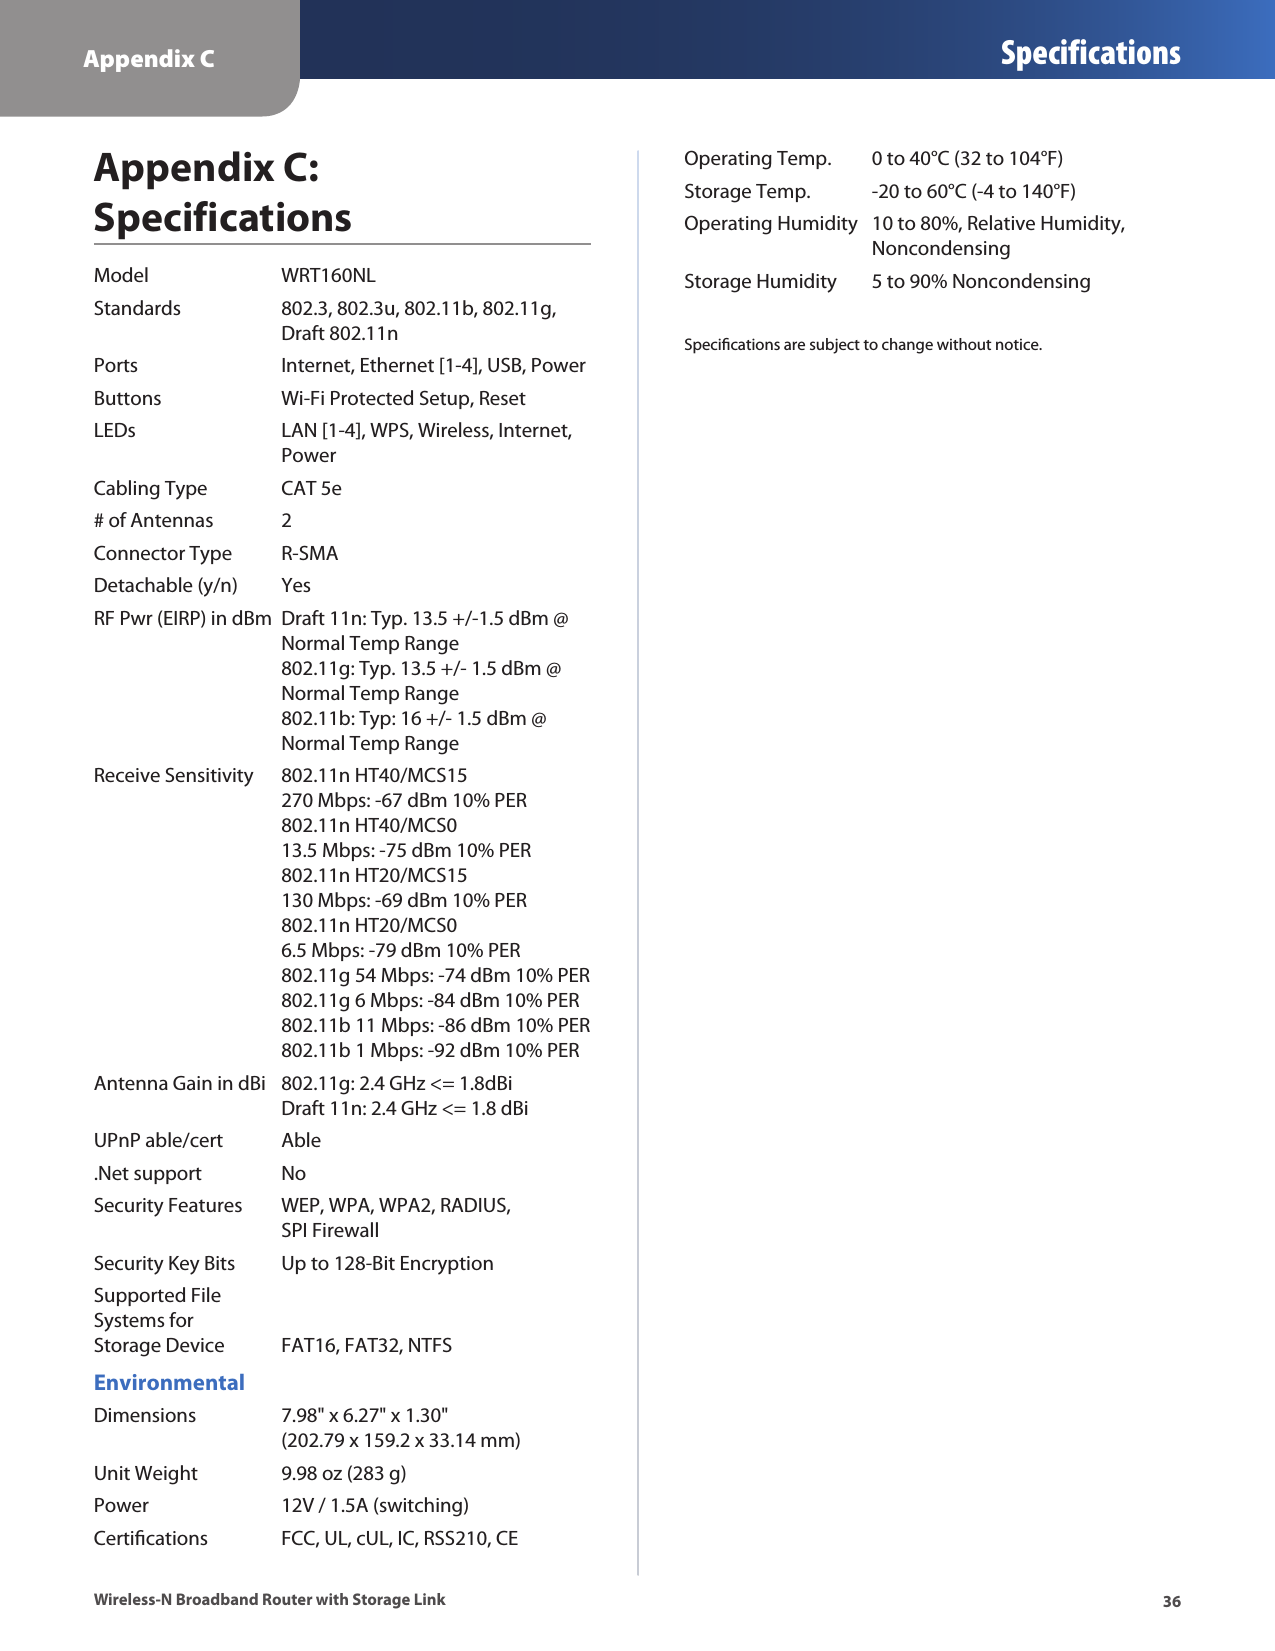 Appendix C Specifications36Wireless-N Broadband Router with Storage LinkAppendix C:  SpecificationsModel  WRT160NLStandards  802.3, 802.3u, 802.11b, 802.11g,    Draft 802.11nPorts  Internet, Ethernet [1-4], USB, PowerButtons  Wi-Fi Protected Setup, ResetLEDs  LAN [1-4], WPS, Wireless, Internet,    PowerCabling Type  CAT 5e# of Antennas  2Connector Type  R-SMADetachable (y/n)  YesRF Pwr (EIRP) in dBm  Draft 11n: Typ. 13.5 +/-1.5 dBm @   Normal Temp Range   802.11g: Typ. 13.5 +/- 1.5 dBm @    Normal Temp Range   802.11b: Typ: 16 +/- 1.5 dBm @    Normal Temp RangeReceive Sensitivity  802.11n HT40/MCS15    270 Mbps: -67 dBm 10% PER   802.11n HT40/MCS0    13.5 Mbps: -75 dBm 10% PER   802.11n HT20/MCS15    130 Mbps: -69 dBm 10% PER   802.11n HT20/MCS0    6.5 Mbps: -79 dBm 10% PER   802.11g 54 Mbps: -74 dBm 10% PER   802.11g 6 Mbps: -84 dBm 10% PER   802.11b 11 Mbps: -86 dBm 10% PER   802.11b 1 Mbps: -92 dBm 10% PERAntenna Gain in dBi  802.11g: 2.4 GHz &lt;= 1.8dBi   Draft 11n: 2.4 GHz &lt;= 1.8 dBiUPnP able/cert  Able.Net support  NoSecurity Features  WEP, WPA, WPA2, RADIUS,    SPI FirewallSecurity Key Bits  Up to 128-Bit EncryptionSupported File  Systems for  Storage Device  FAT16, FAT32, NTFSEnvironmentalDimensions  7.98&quot; x 6.27&quot; x 1.30&quot;   (202.79 x 159.2 x 33.14 mm)Unit Weight  9.98 oz (283 g)Power  12V / 1.5A (switching)Certications  FCC, UL, cUL, IC, RSS210, CEOperating Temp.  0 to 40°C (32 to 104°F)Storage Temp.  -20 to 60°C (-4 to 140°F)Operating Humidity  10 to 80%, Relative Humidity,    NoncondensingStorage Humidity  5 to 90% NoncondensingSpecications are subject to change without notice.